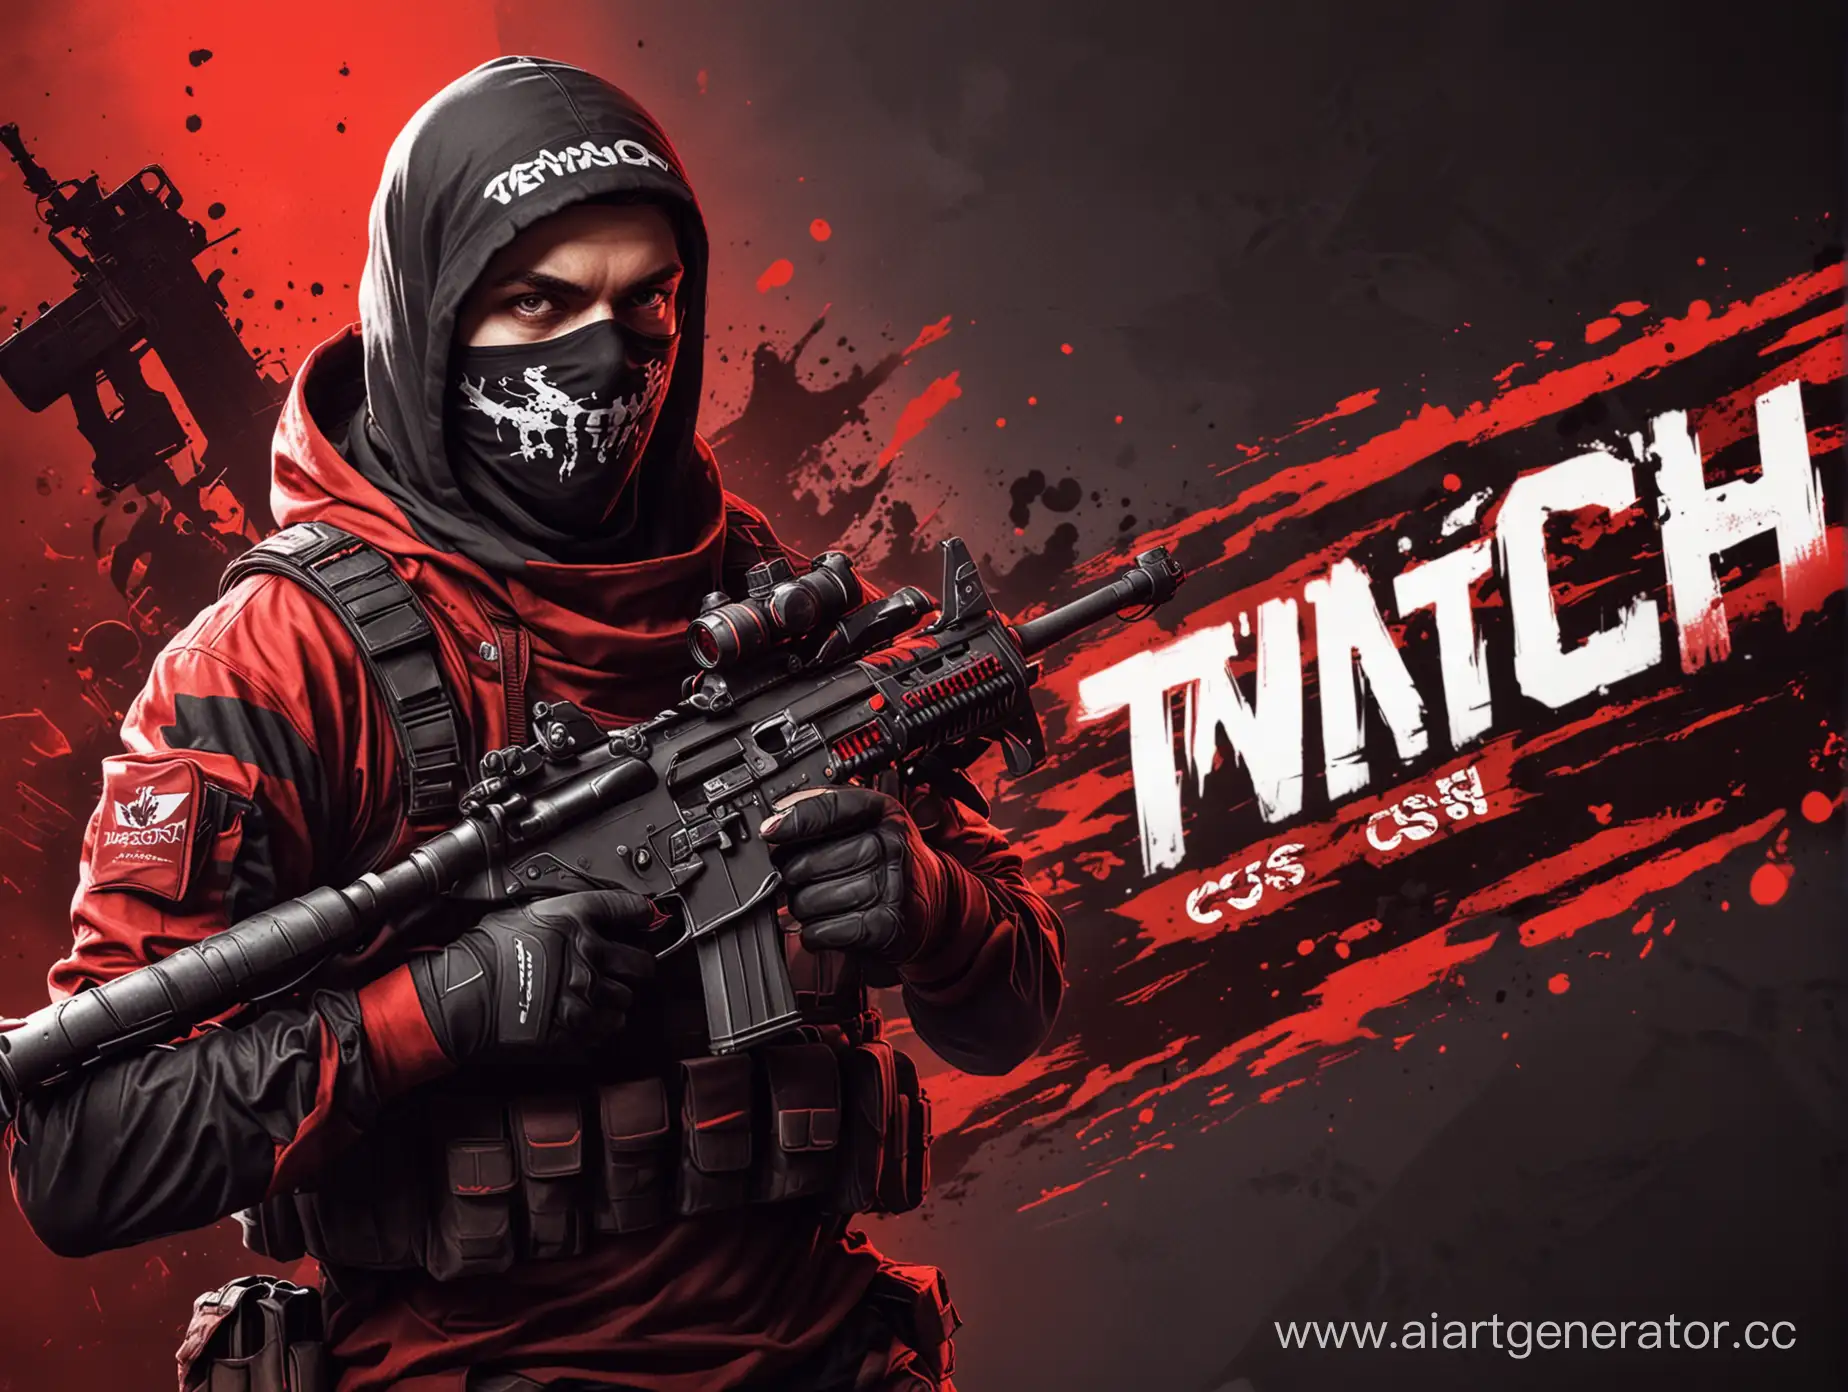 Crazy-Terrorist-Character-in-Red-Black-and-White-CS-2-CS-Go-Twitch-Banner